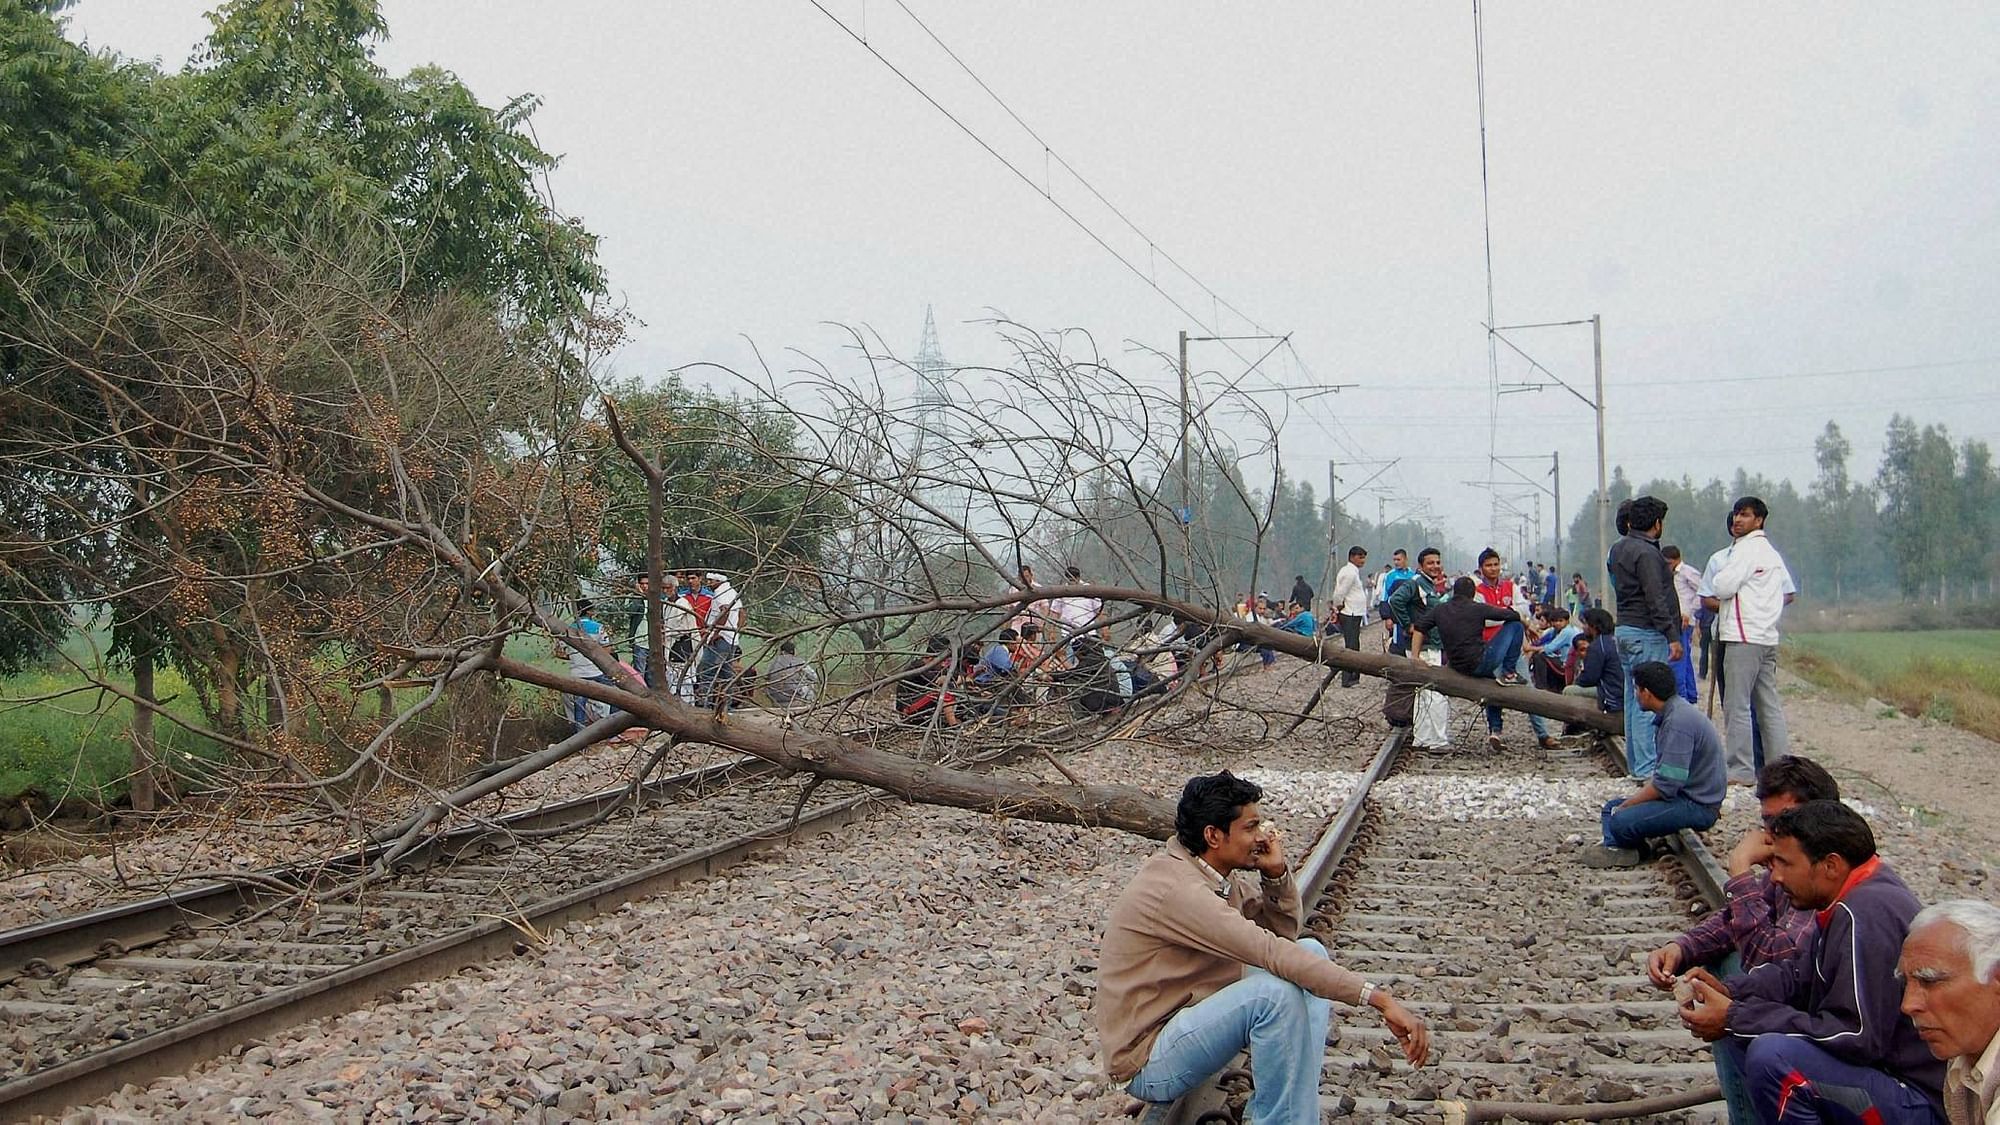  Jat community members block the railway tracks during their agitation for reservation in Sonipat on Friday. (Photo: PTI)